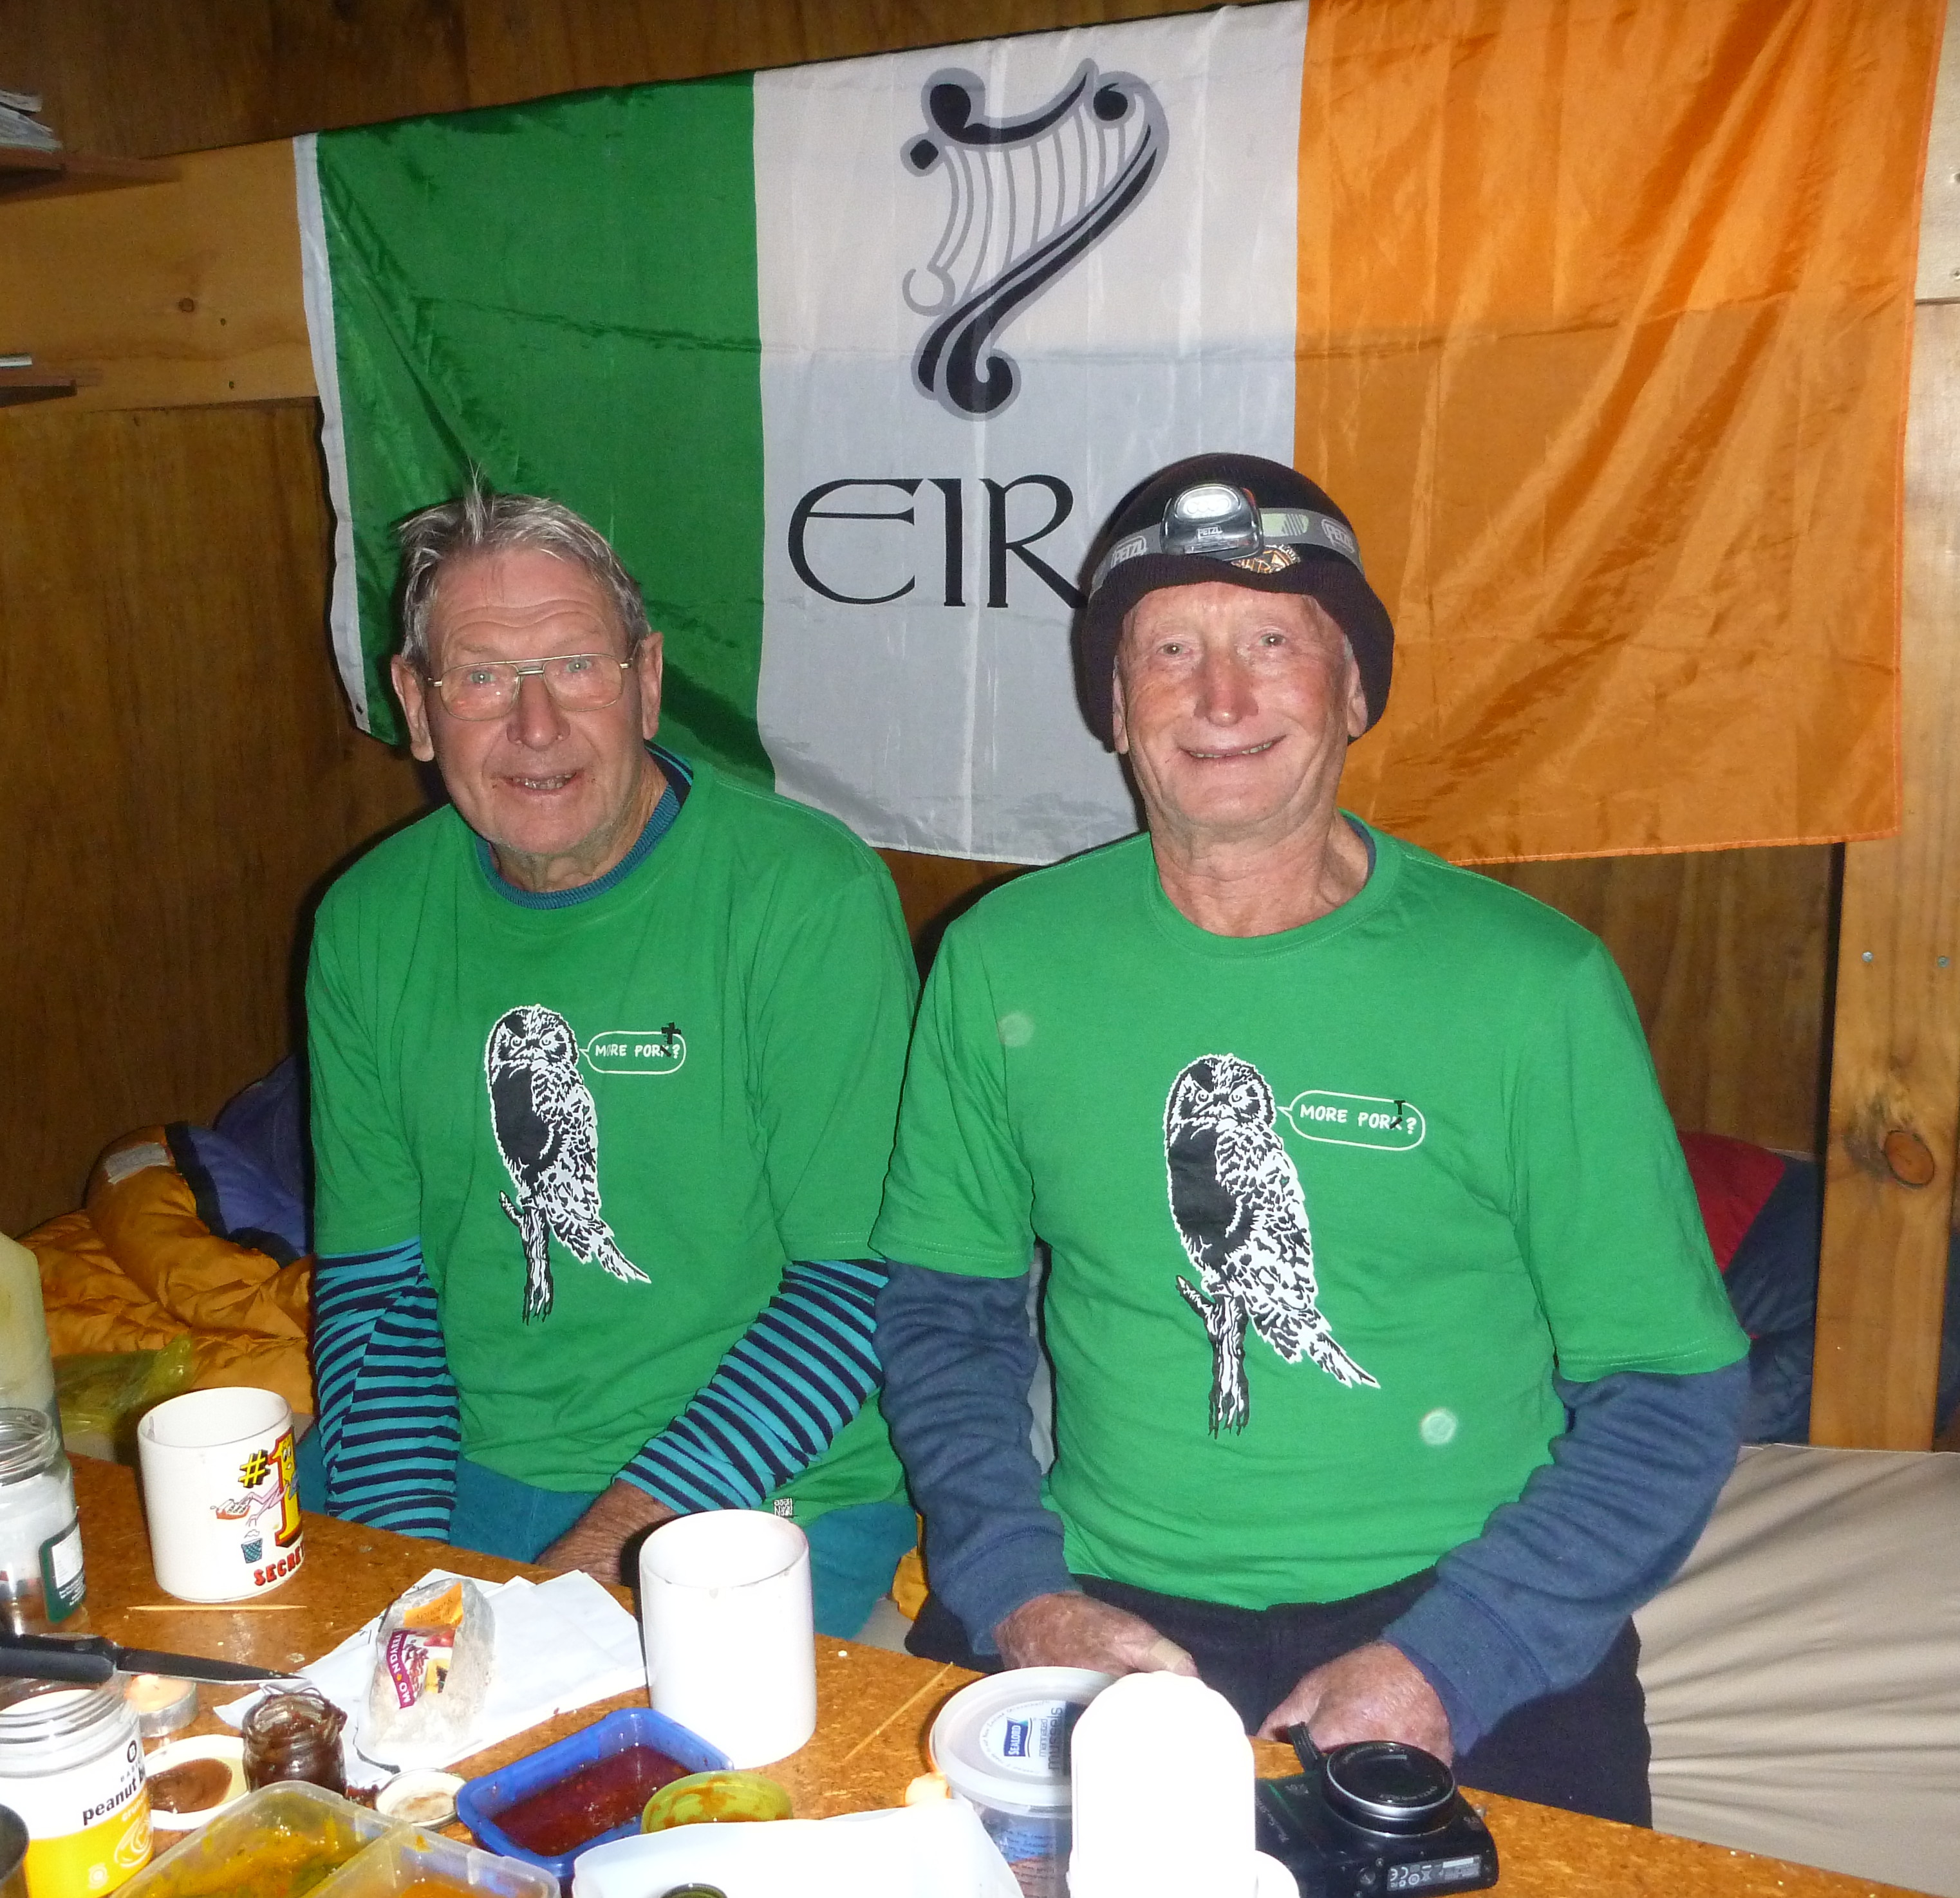 The hut wardens, Ted and Paul in their green garb